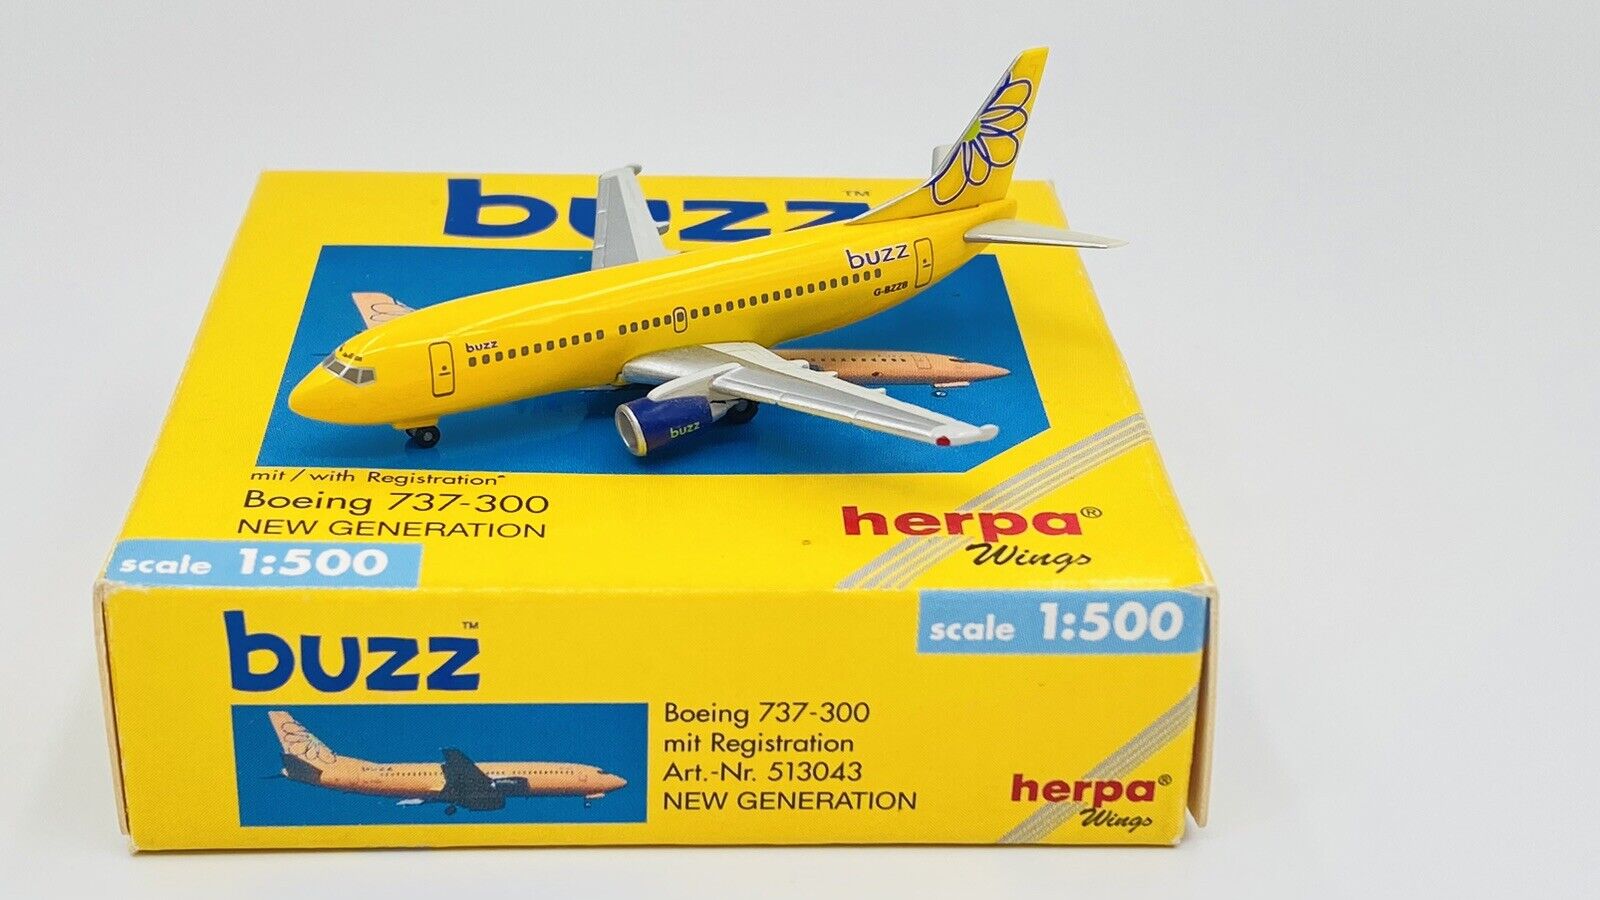 HERPA WINGS (513043) 1:500 BUZZ BOEING 737-300 BOXED